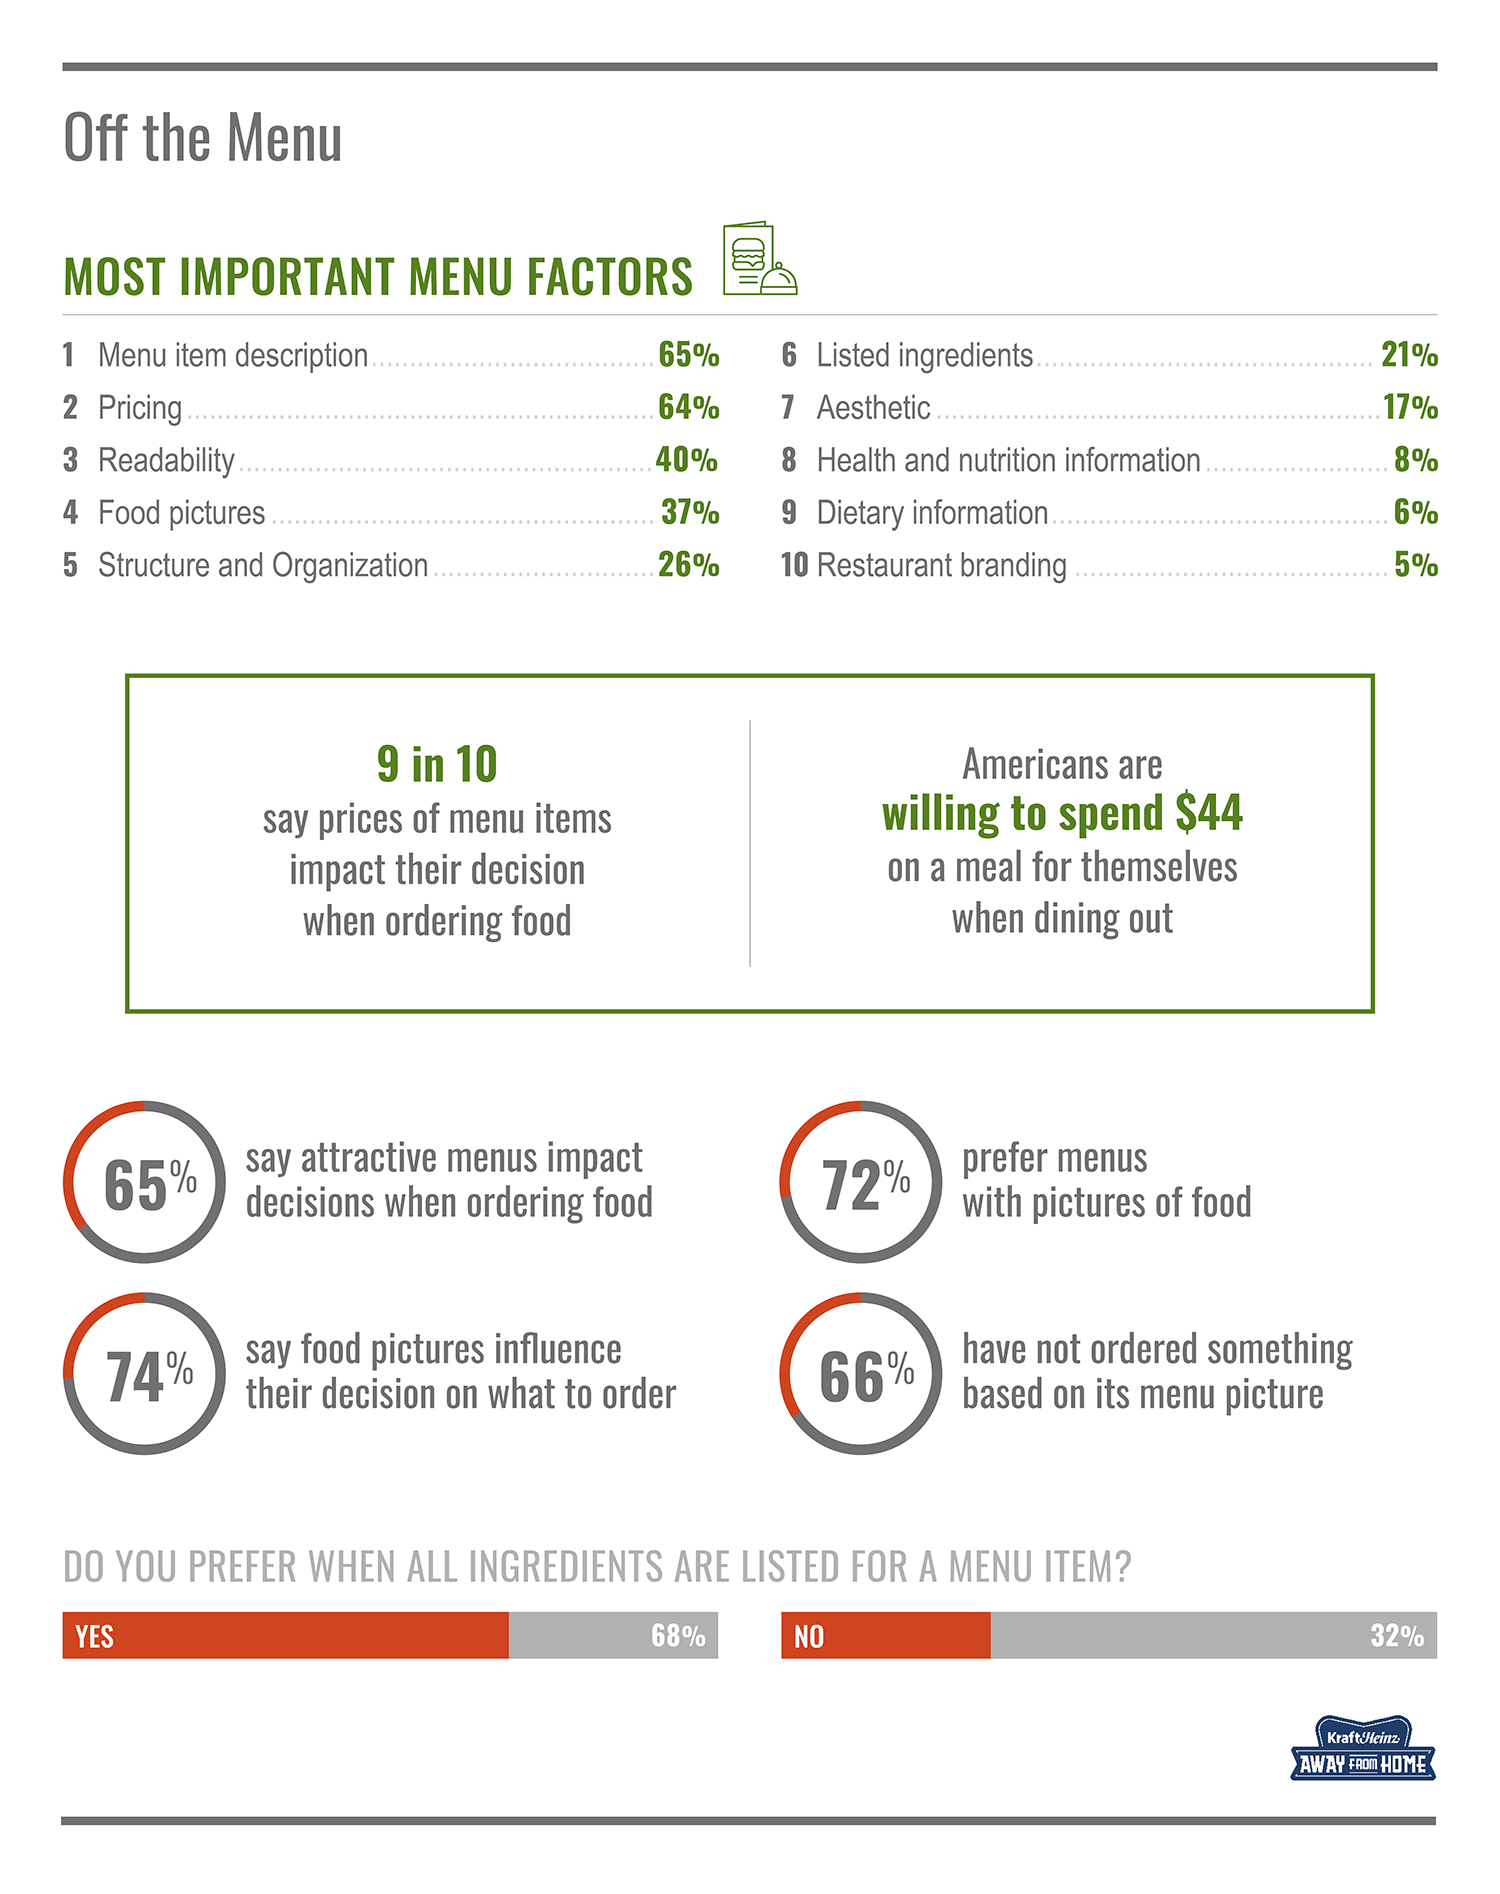 What factors are the most important on a menu to Americans - study from usfoods.com